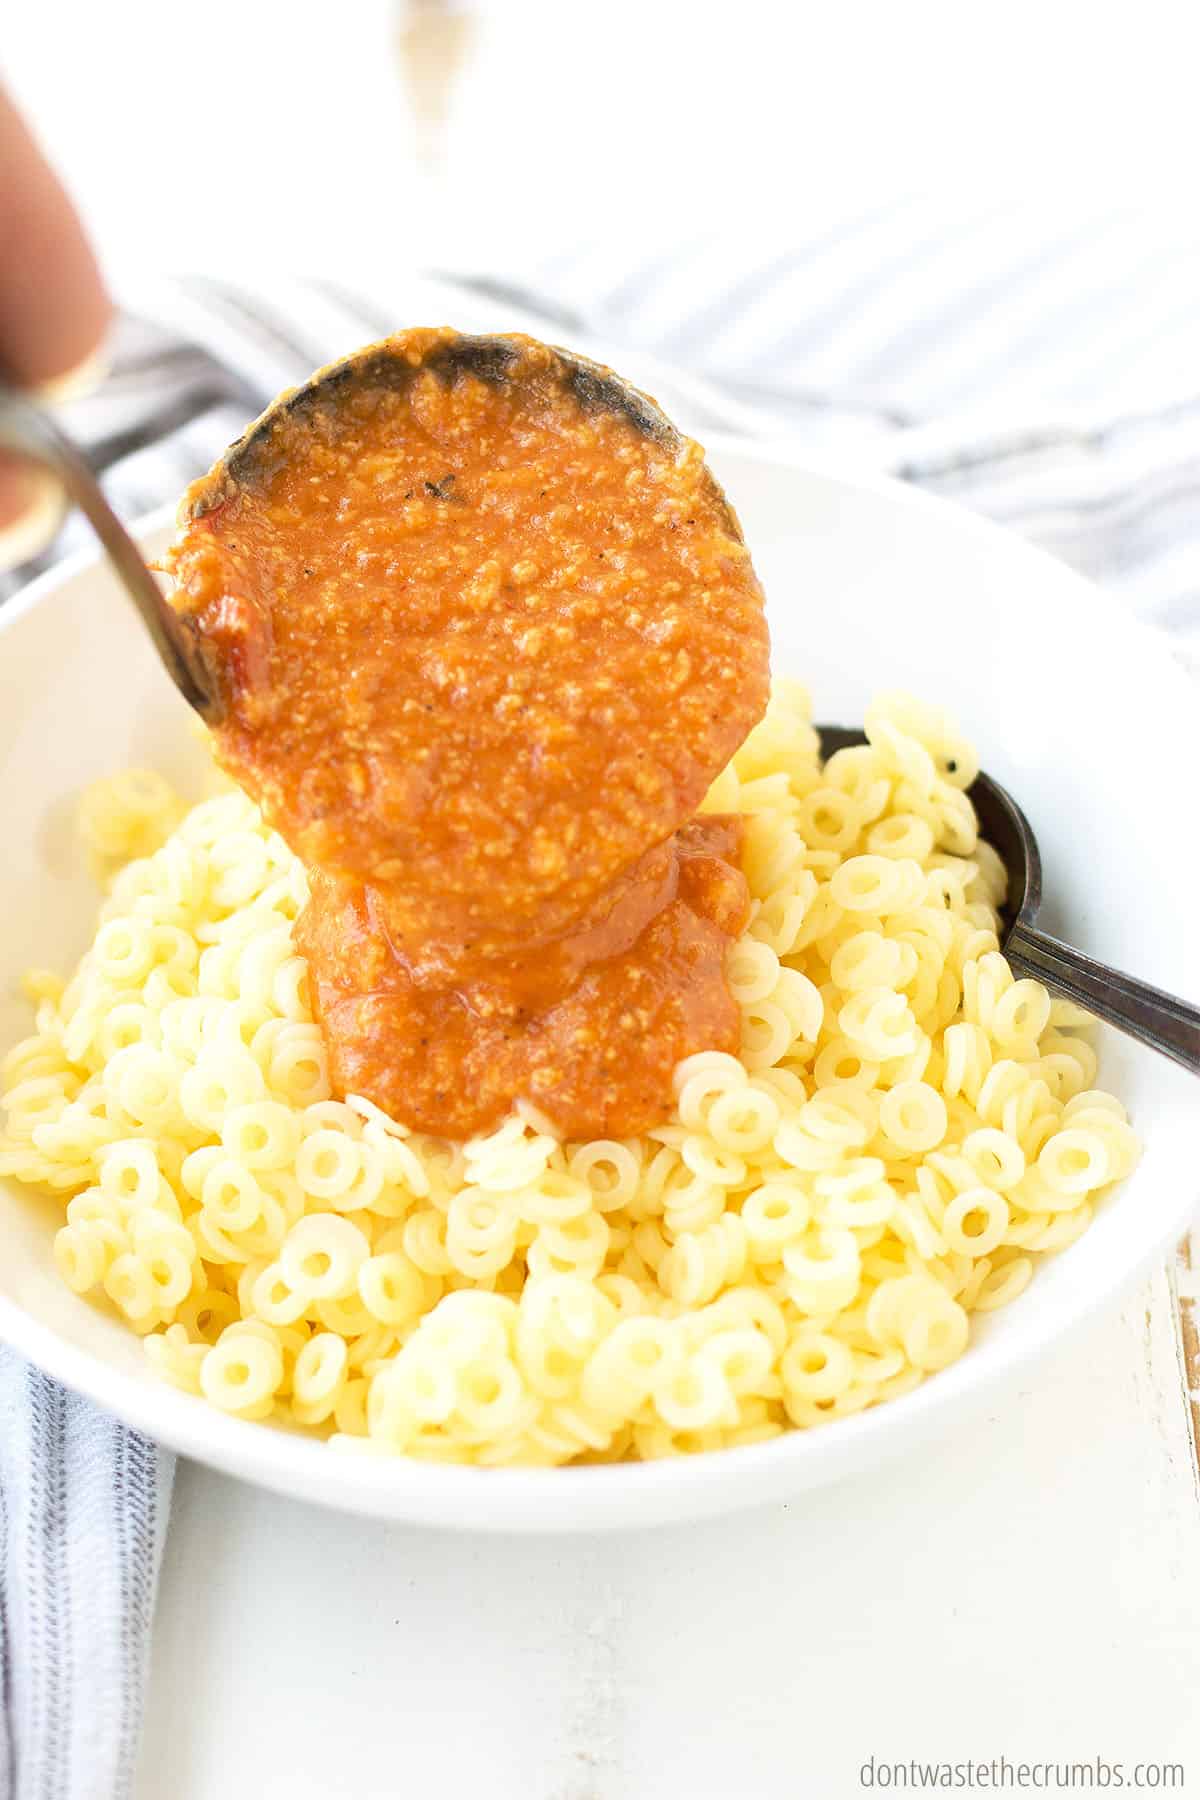 Ladle your fresh homemade tomato sauce over your pasta o's with just the right amount of sauce for your tastes.  